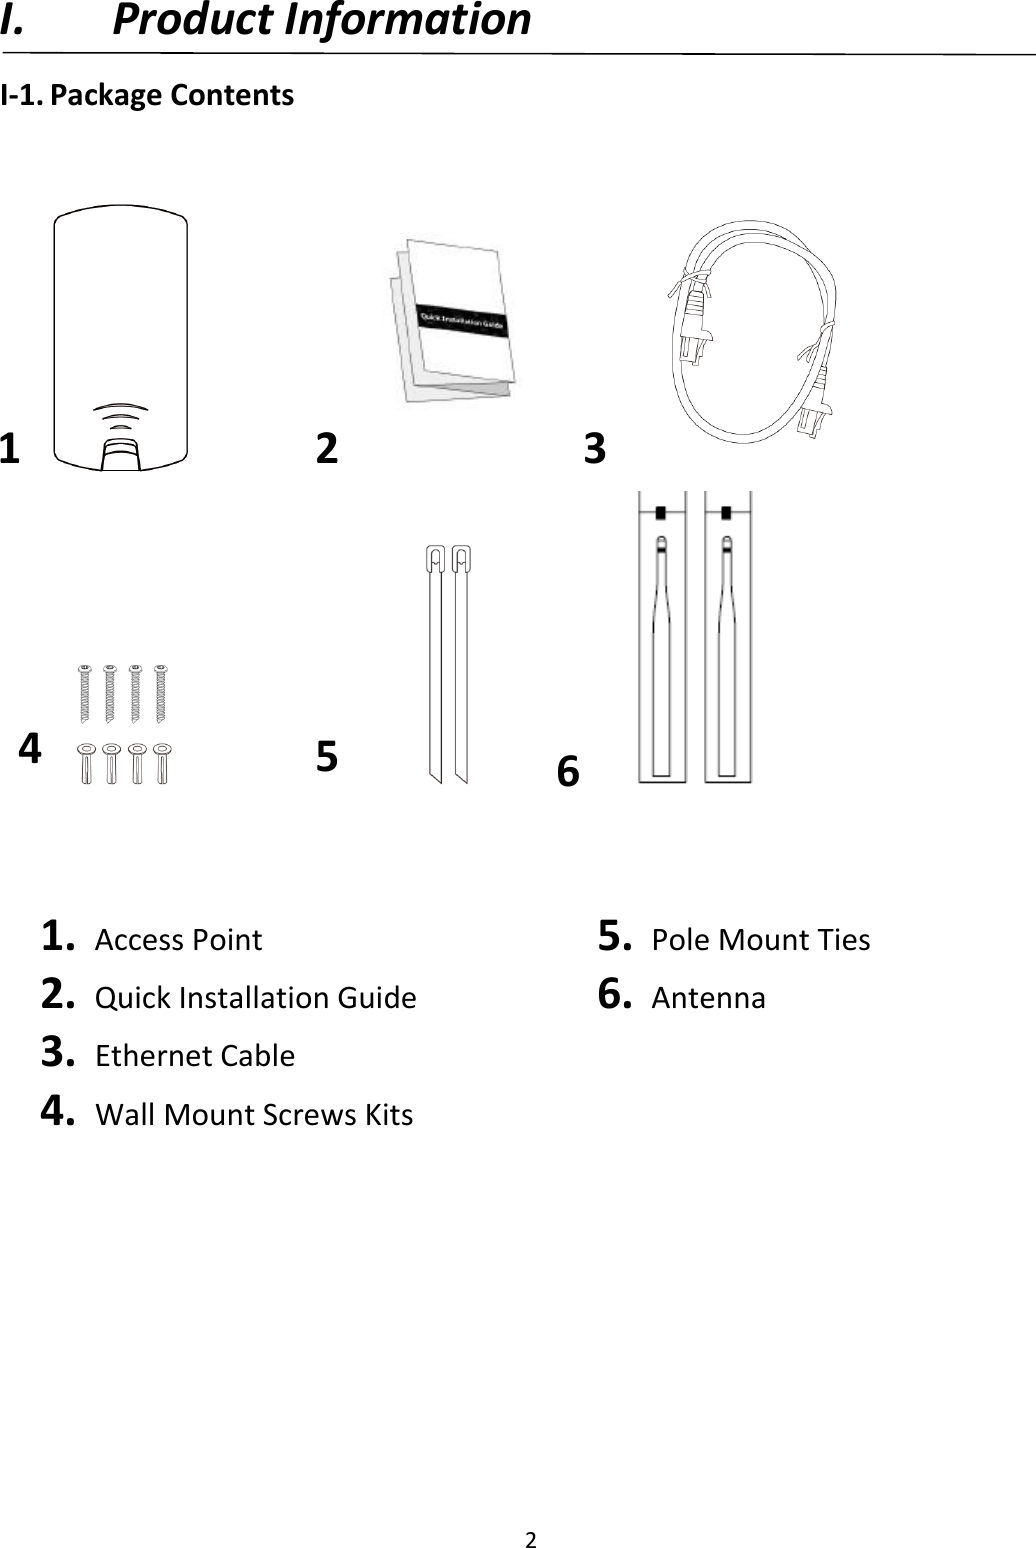 2  I. Product Information I-1. Package Contents                                                                                    1.   Access Point 2.   Quick Installation Guide 3.   Ethernet Cable 4.   Wall Mount Screws Kits  5.   Pole Mount Ties 6.   Antenna             1 2 3 4  5 6   